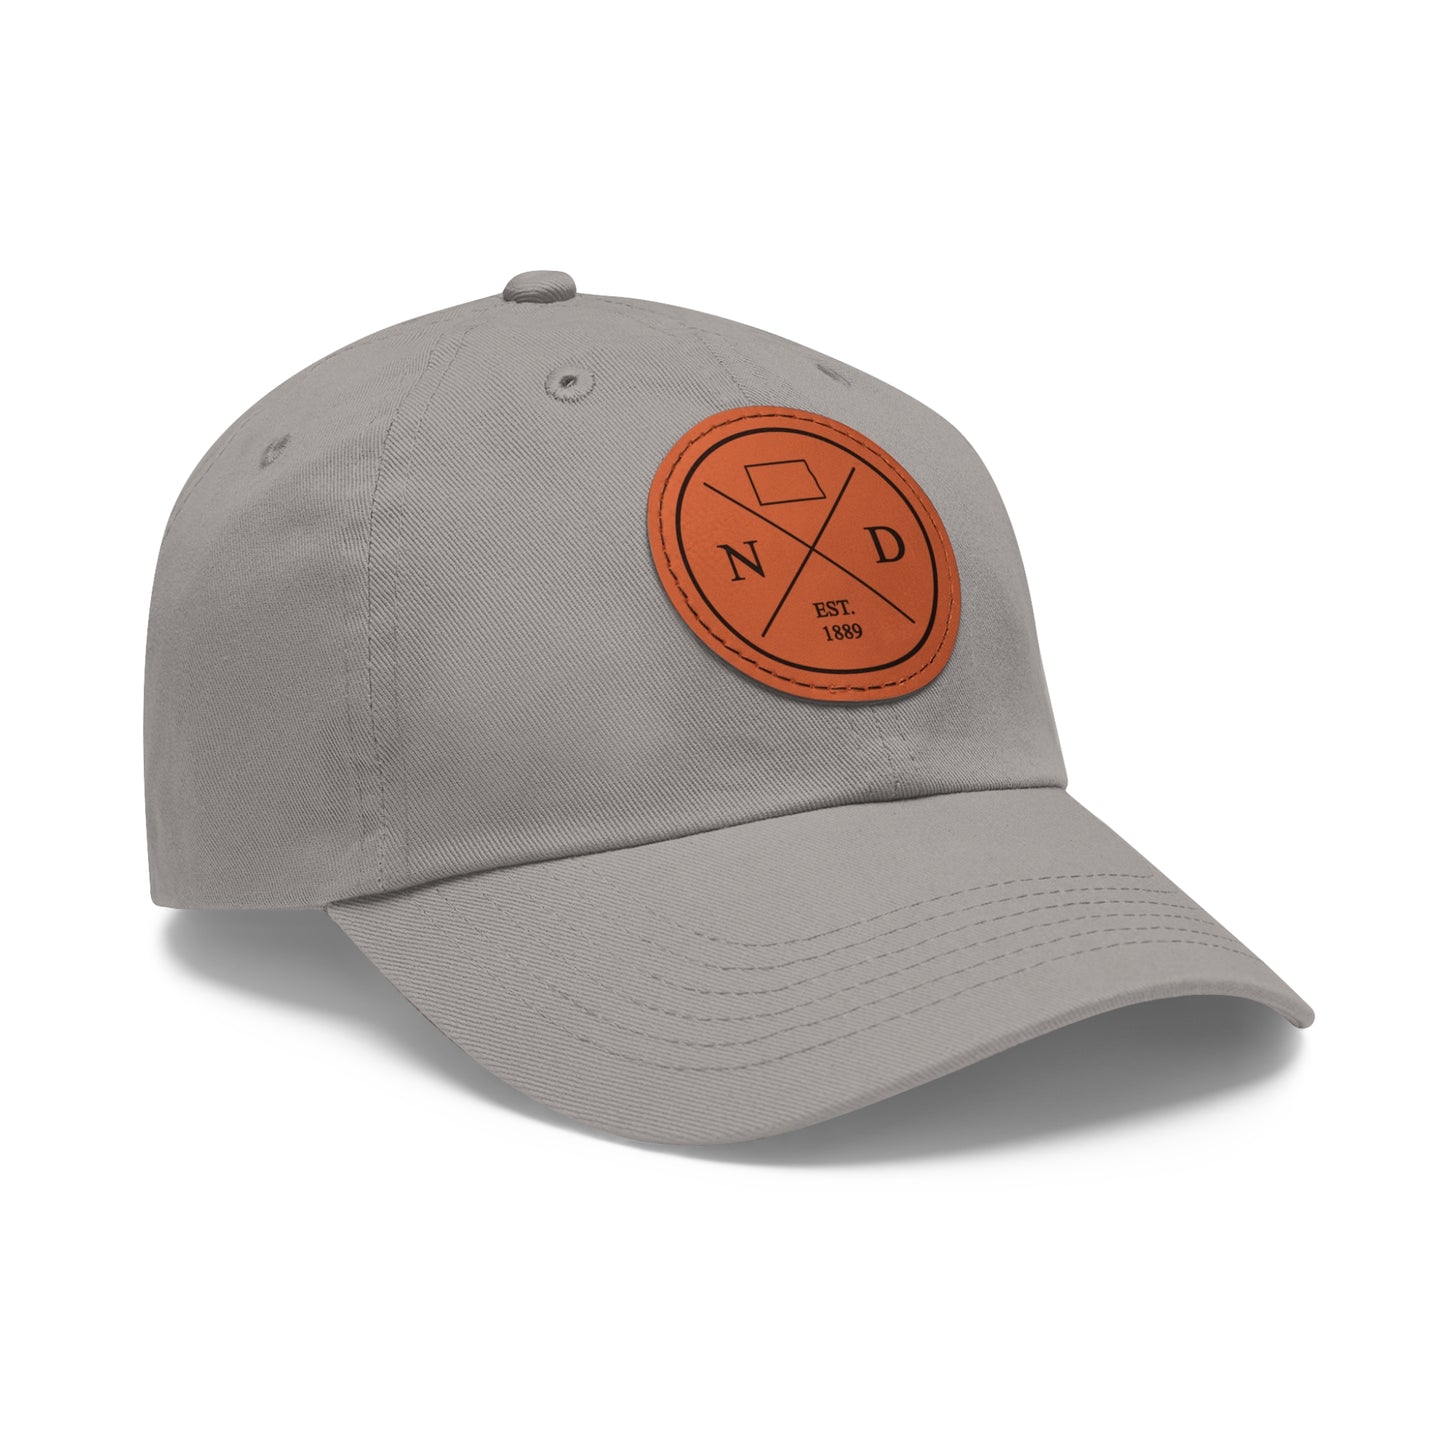 North Dakota Dad Hat with Leather Patch